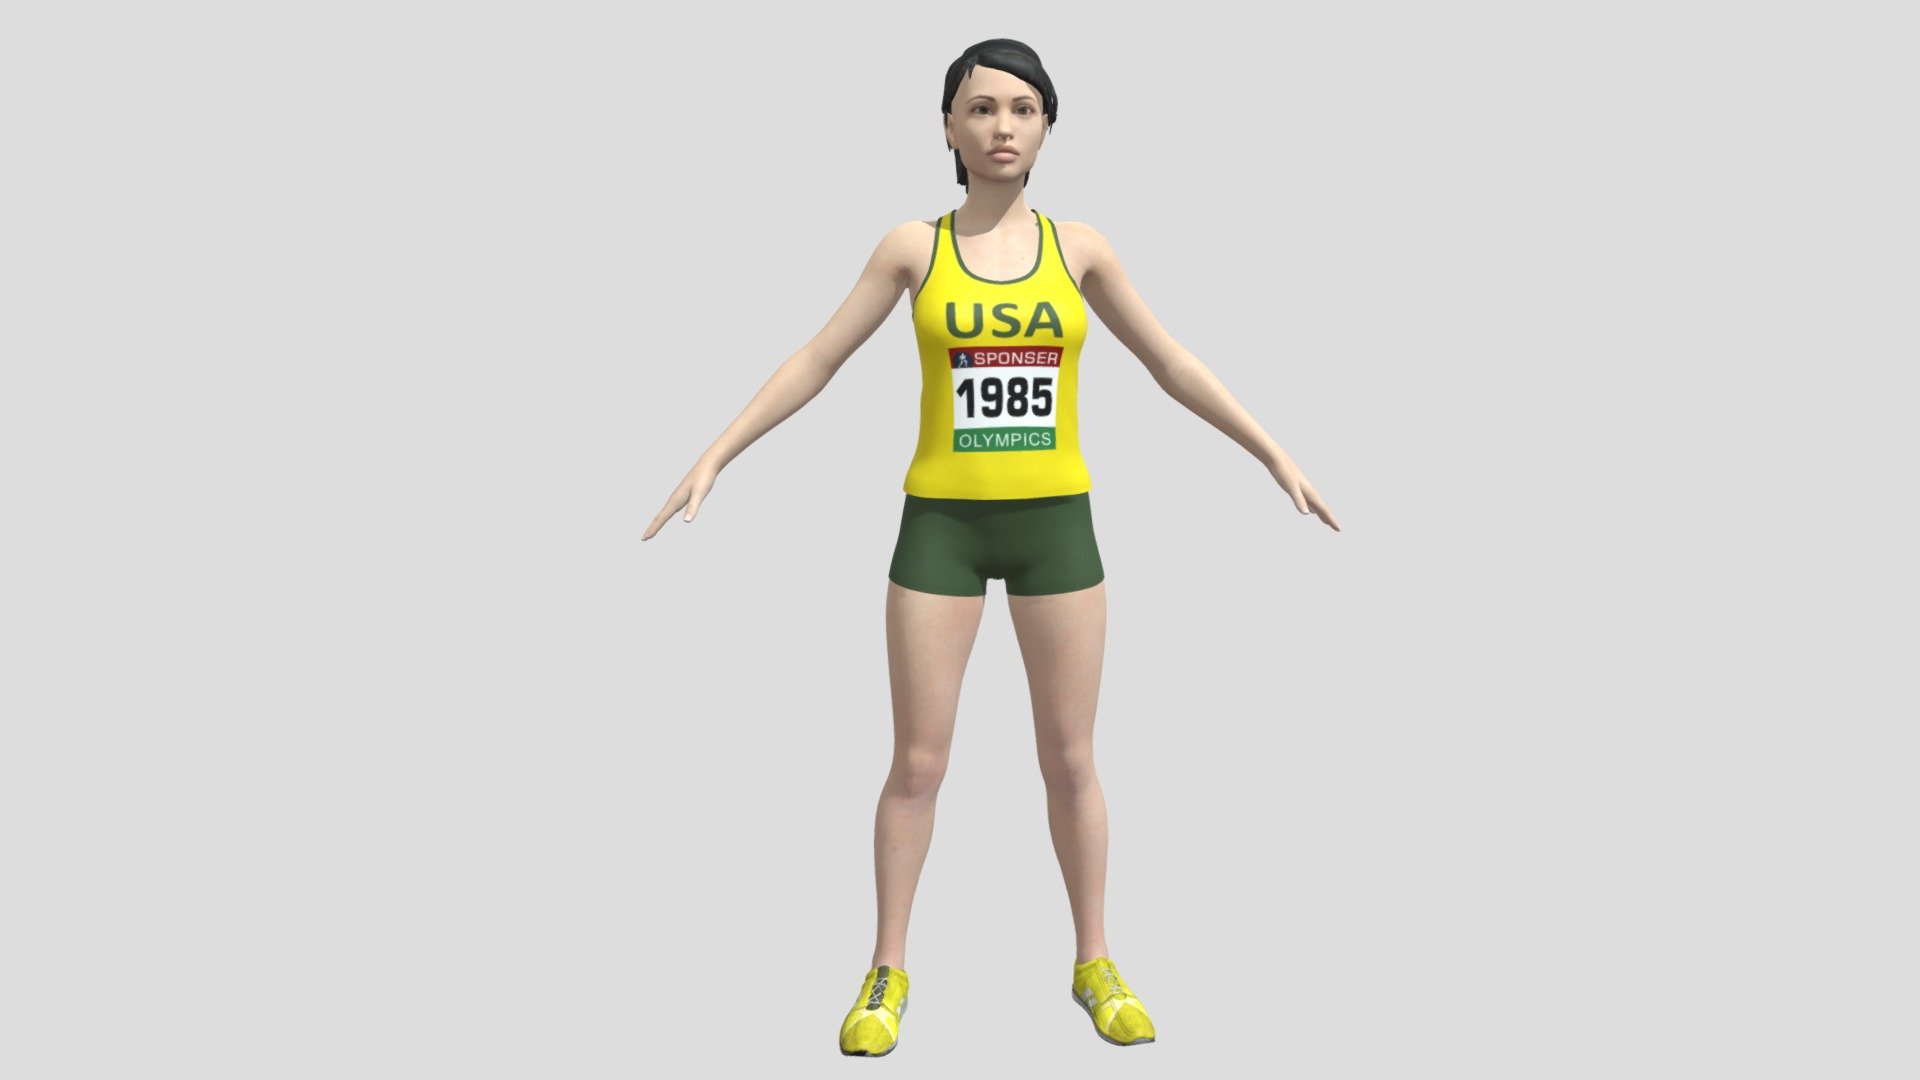 Description:
Athletic Runner 3D model is a high quality, photo real model that will enhance detail and realism to any of your game projects or commercials. The model has a fully textured, detailed design that allows for close-up renders. 

Features:
• High quality polygonal model with detailed texture, correctly scaled for an accurate representation of the original object.
• Maya 2019 V-Ray and standard materials scenes along with multiple other file formats.
• All colours can be easily modified using Photoshop file in the Textures folder
• Model is fully textured with all materials applied.
• All textures and materials are included and mapped in every format.
• Maya models are separated for easy selection, and objects are logically named for ease of scene management.
• No cleaning up necessary, just drop your models into the scene, Load the texture and start rendering 3d model